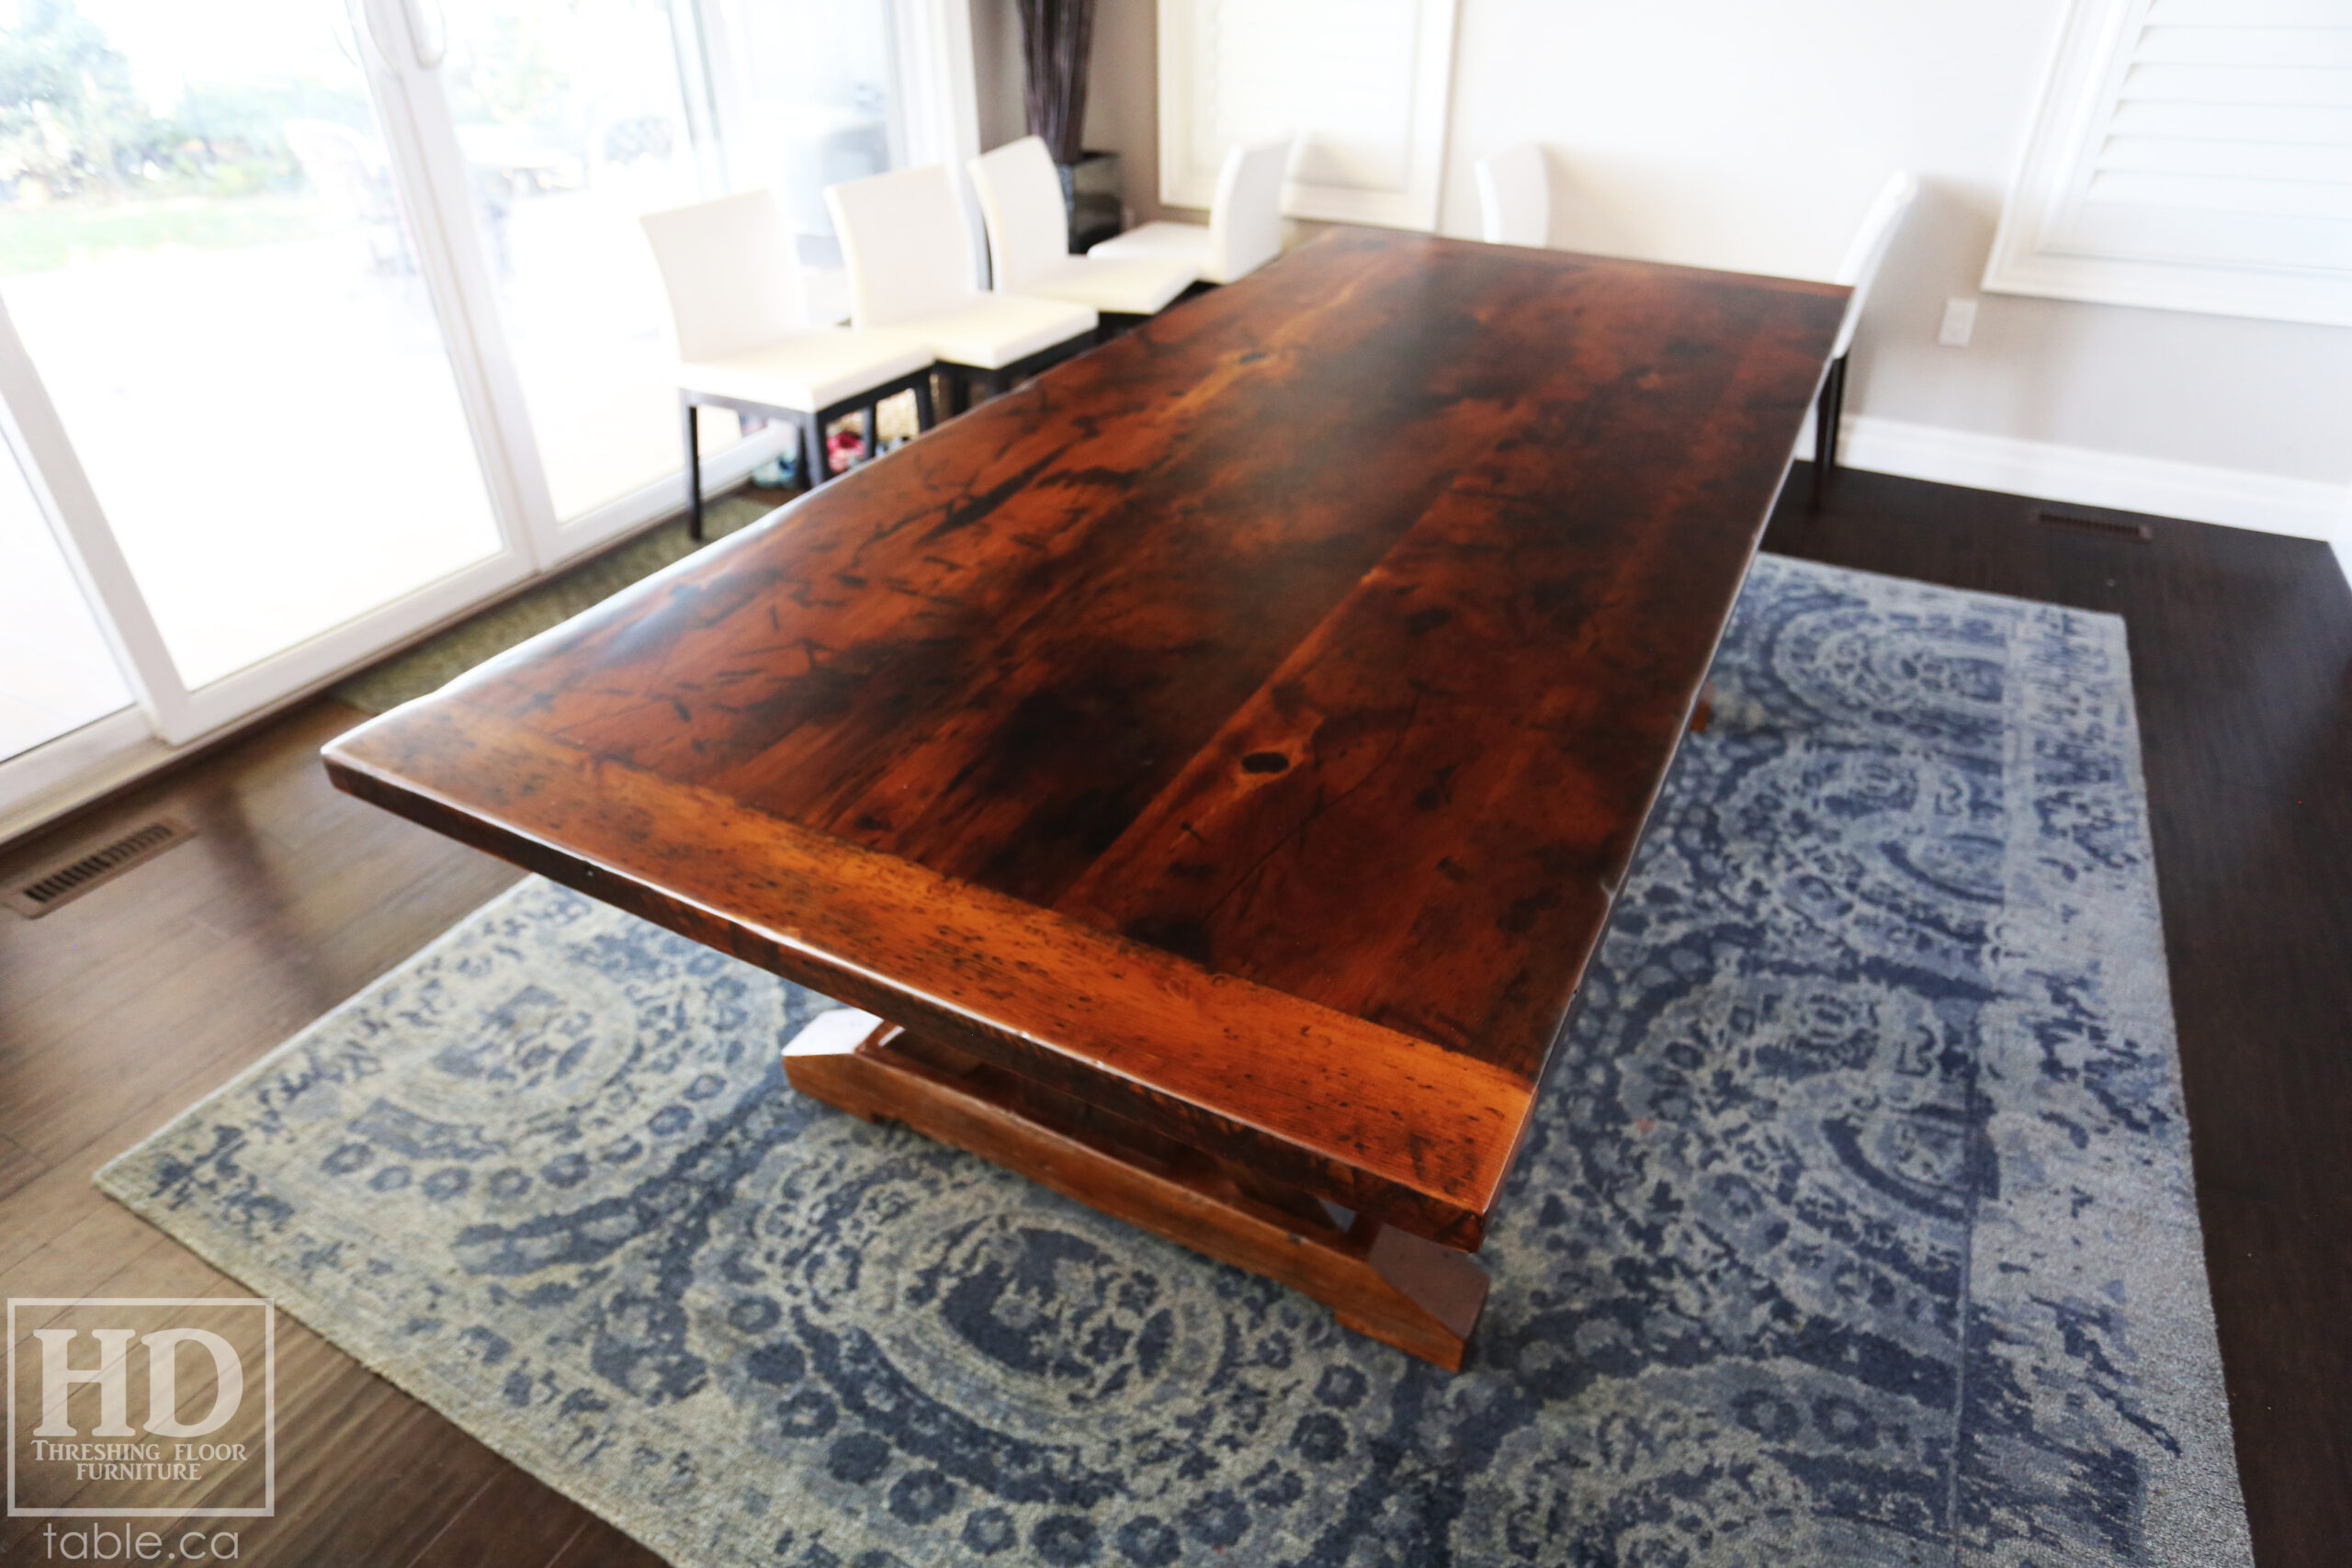 8 ft Reclaimed Ontario Barnwood Table we made for a Sarnia, Ontario home - 42” wide – Sawbuck Base - Reclaimed Hemlock Threshing Floor Construction – Original edges & distressing maintained – Premium epoxy + matte polyurethane finish - www.table.ca